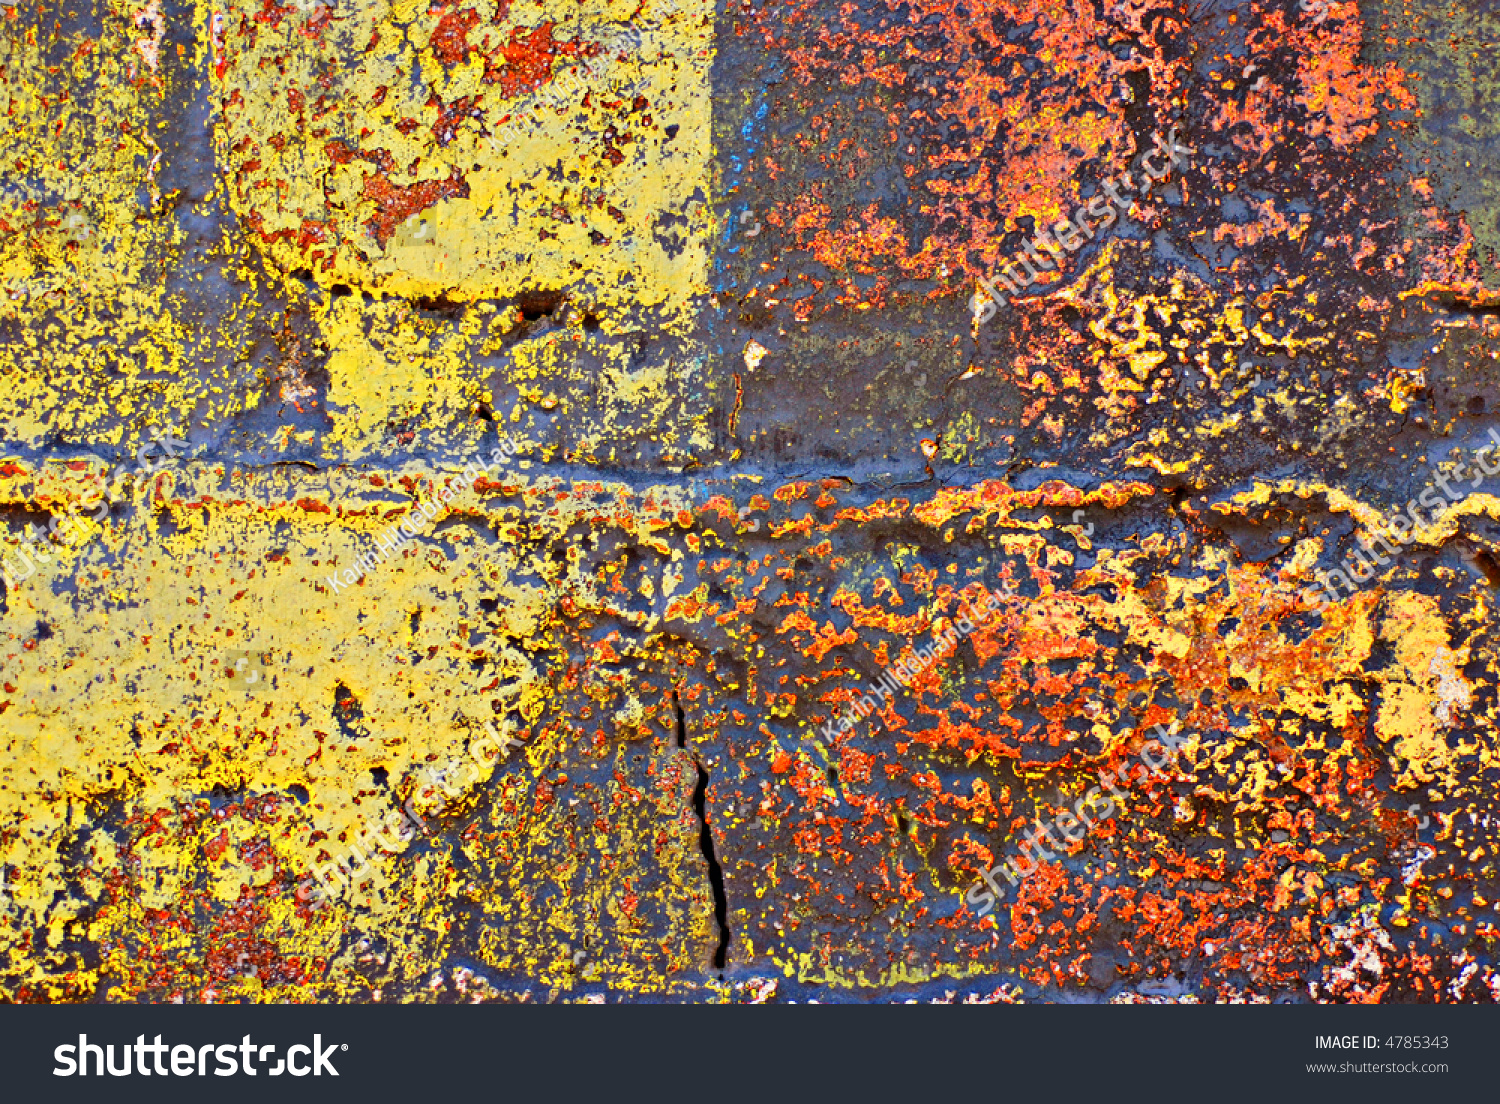 Deteriorating painted brick wall stylized with grunge effects (part of a photo illustration series) #4785343